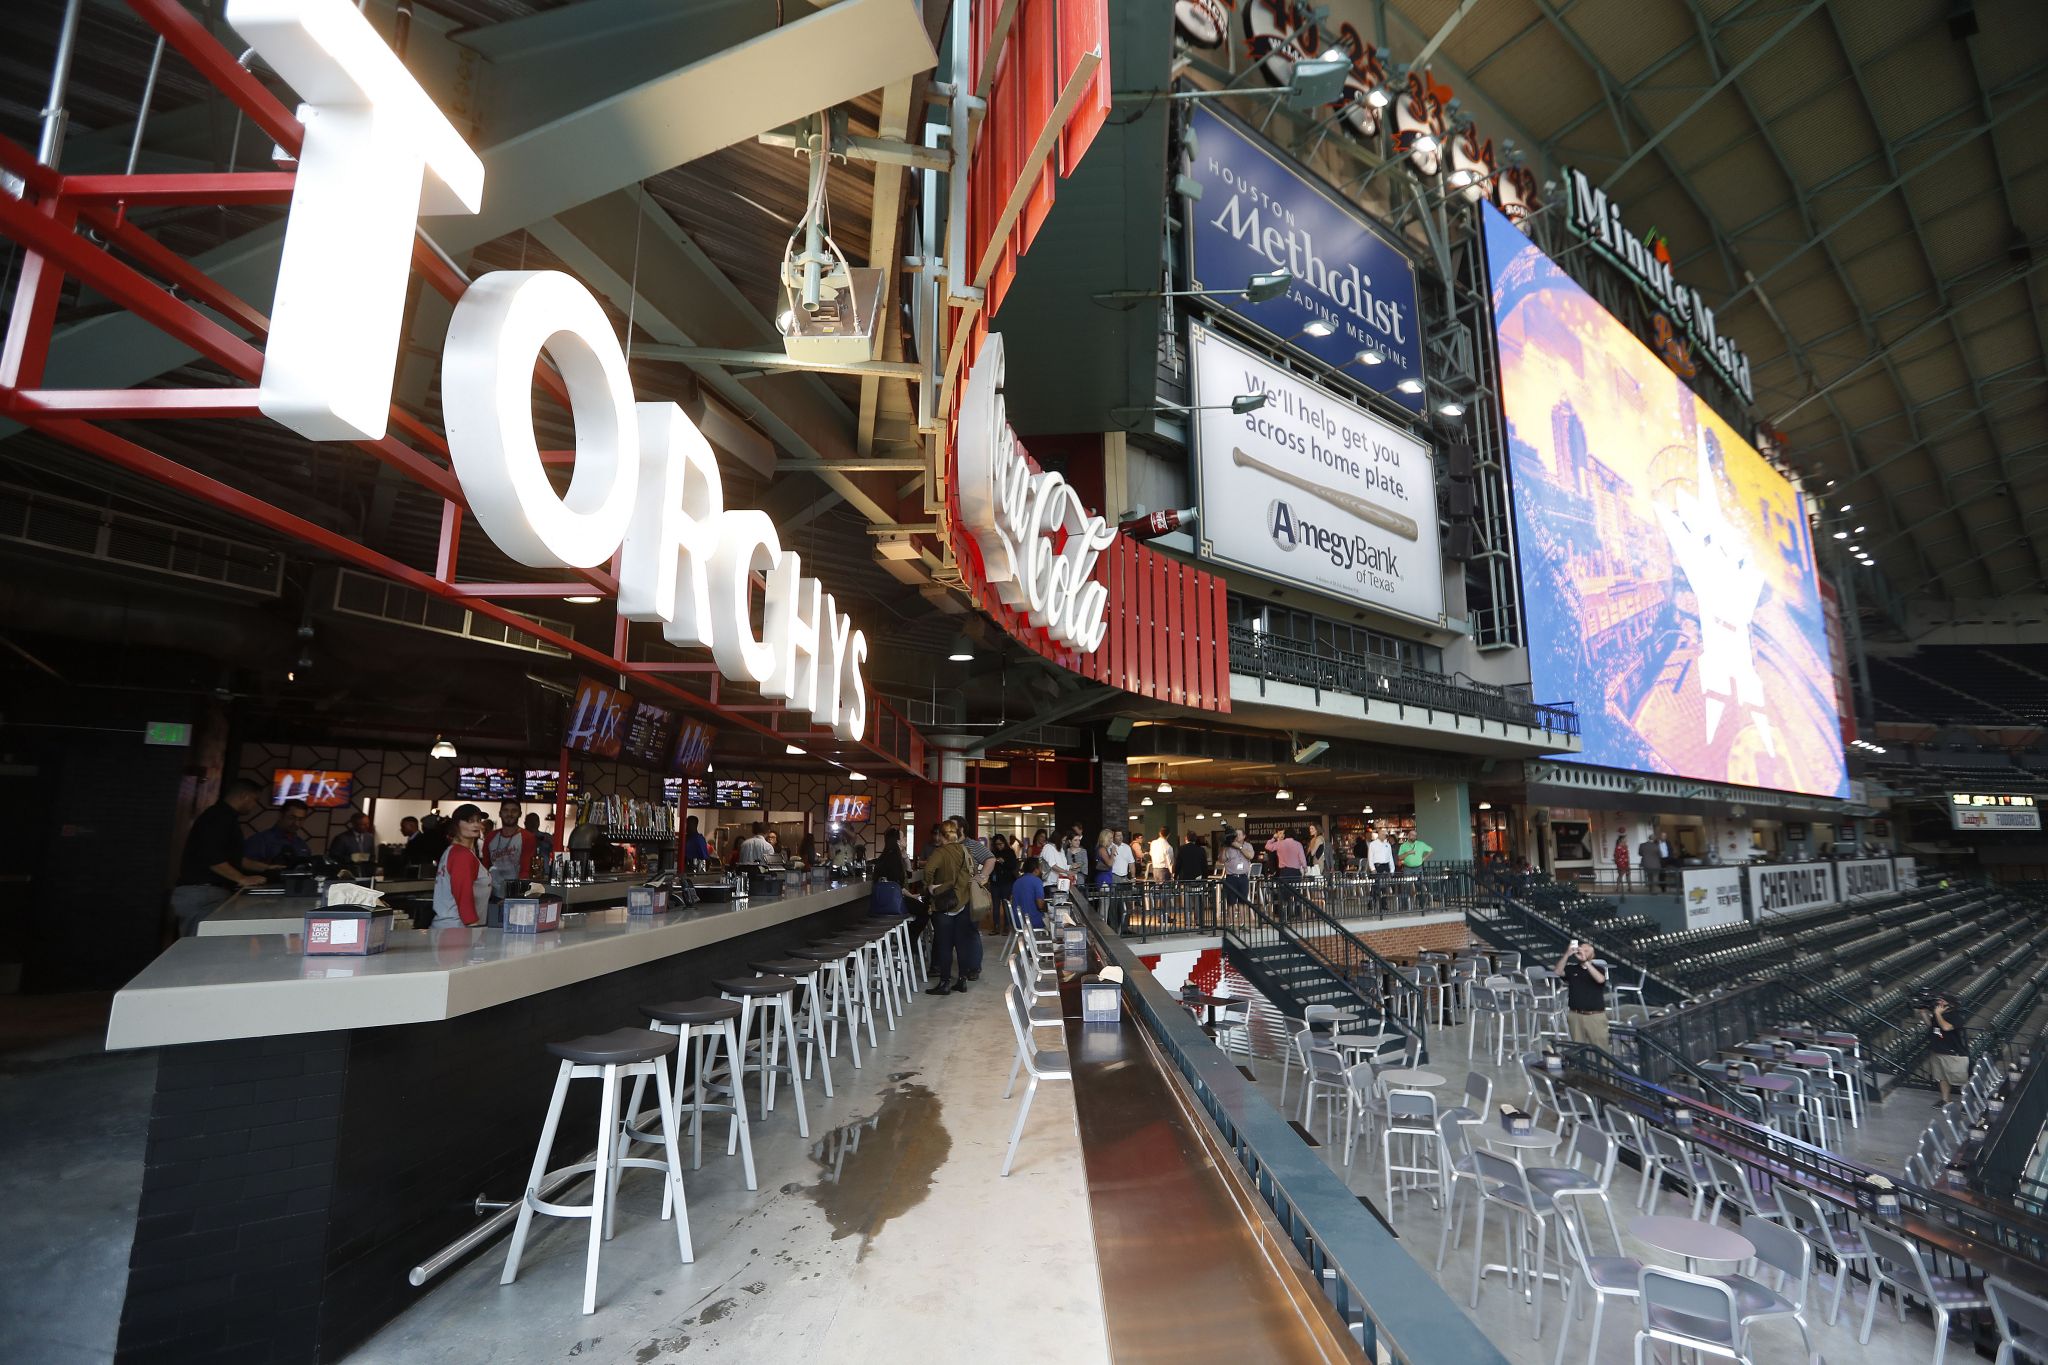 Astros unveil renovations to Minute Maid Park's center field